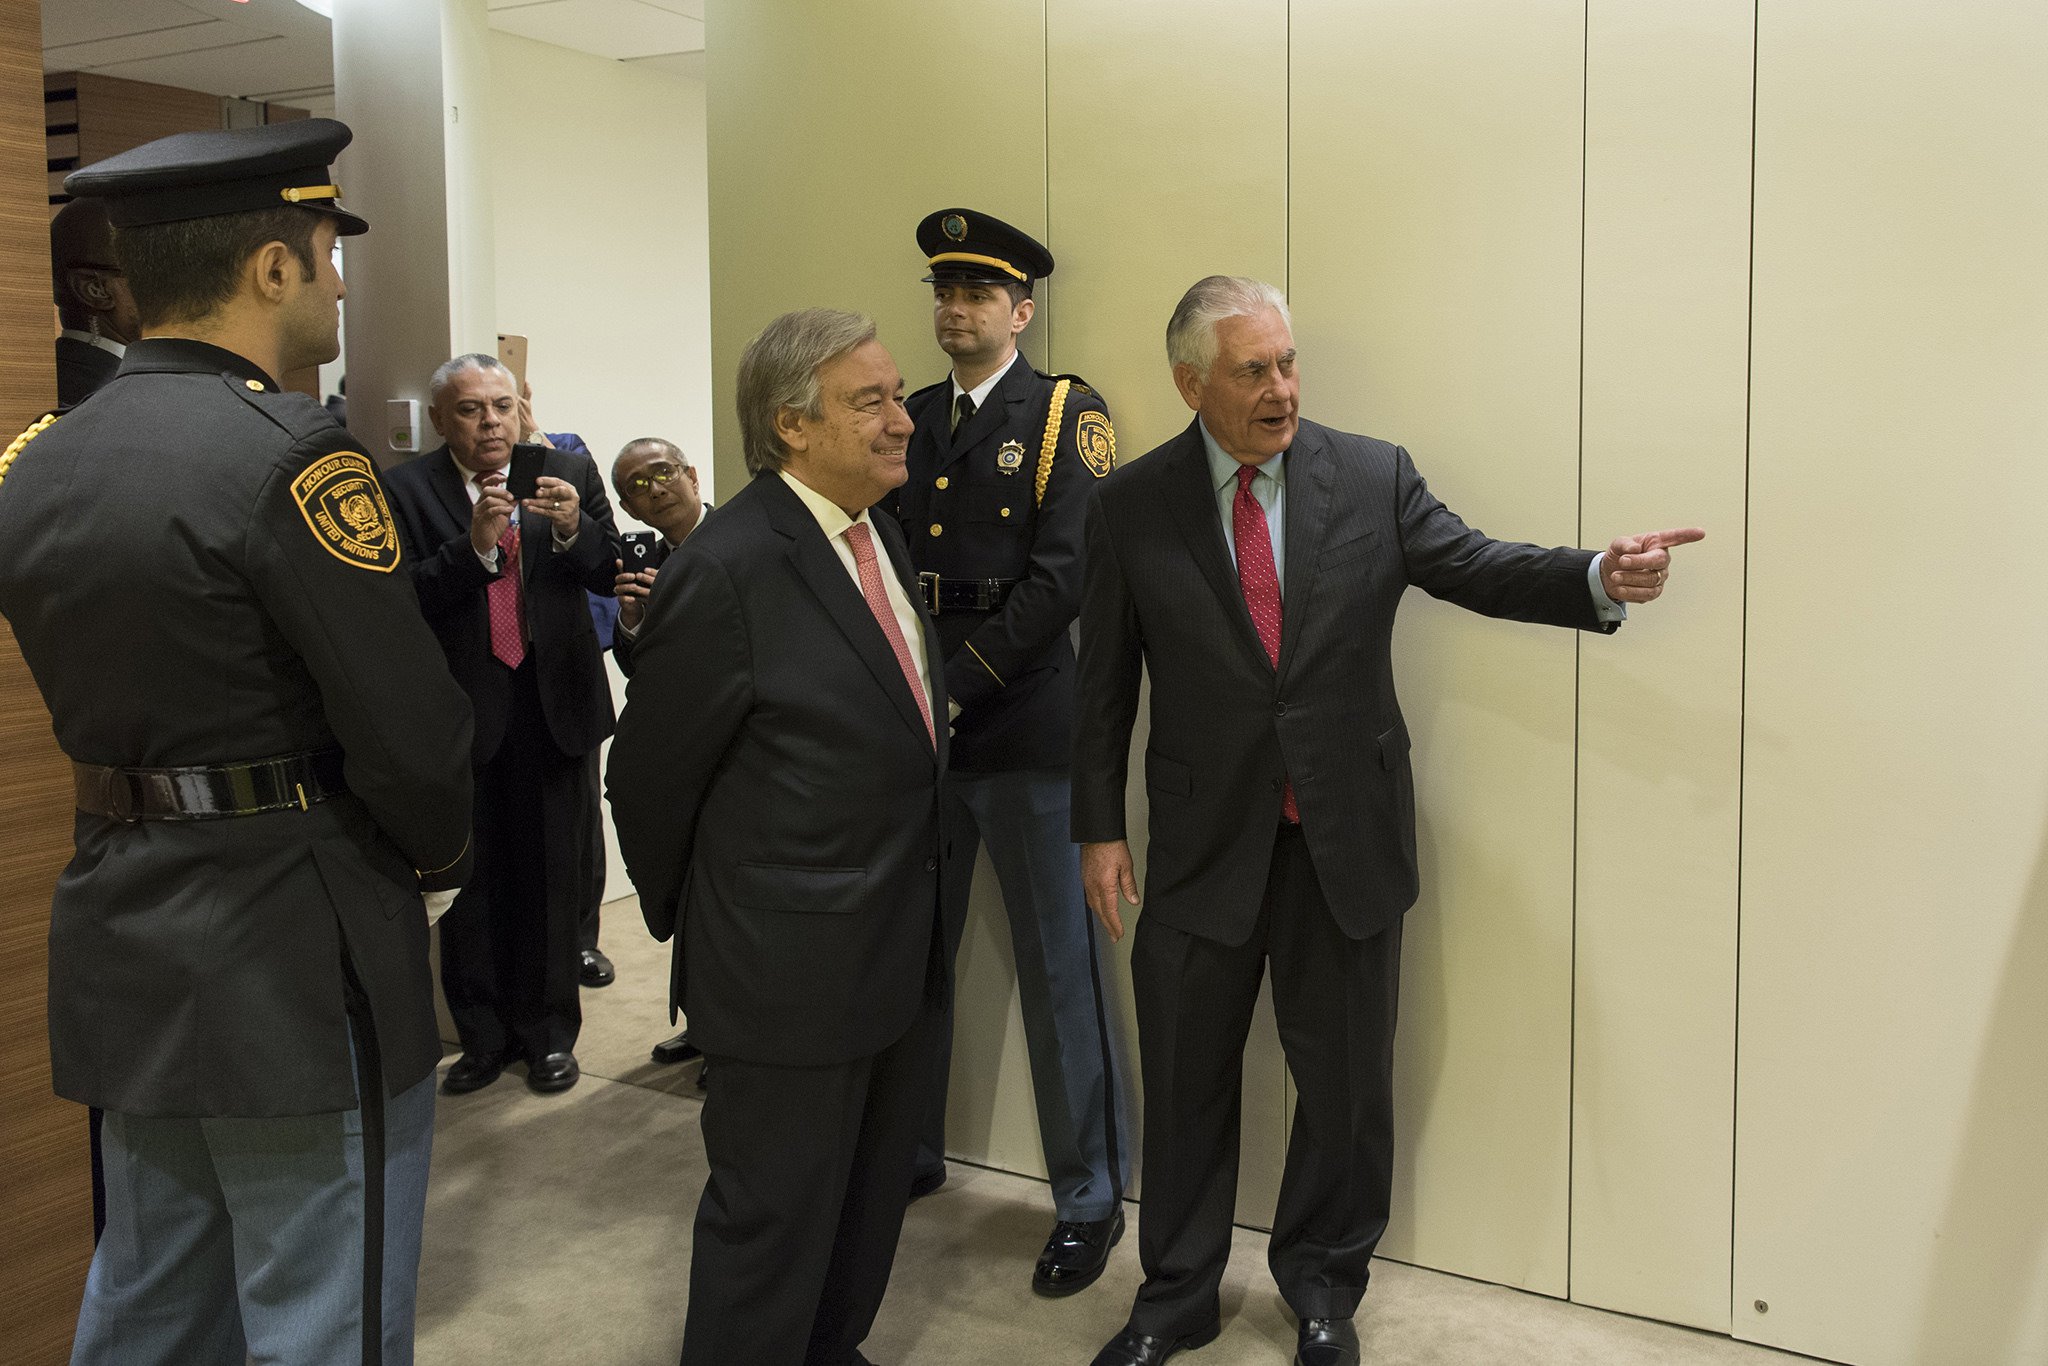 Secretary-General António Guterres and Rex Tillerson, U.S. Secretary of State, backstage at the UN General Assembly Hall, 2017. UN Photo/Mark Garten